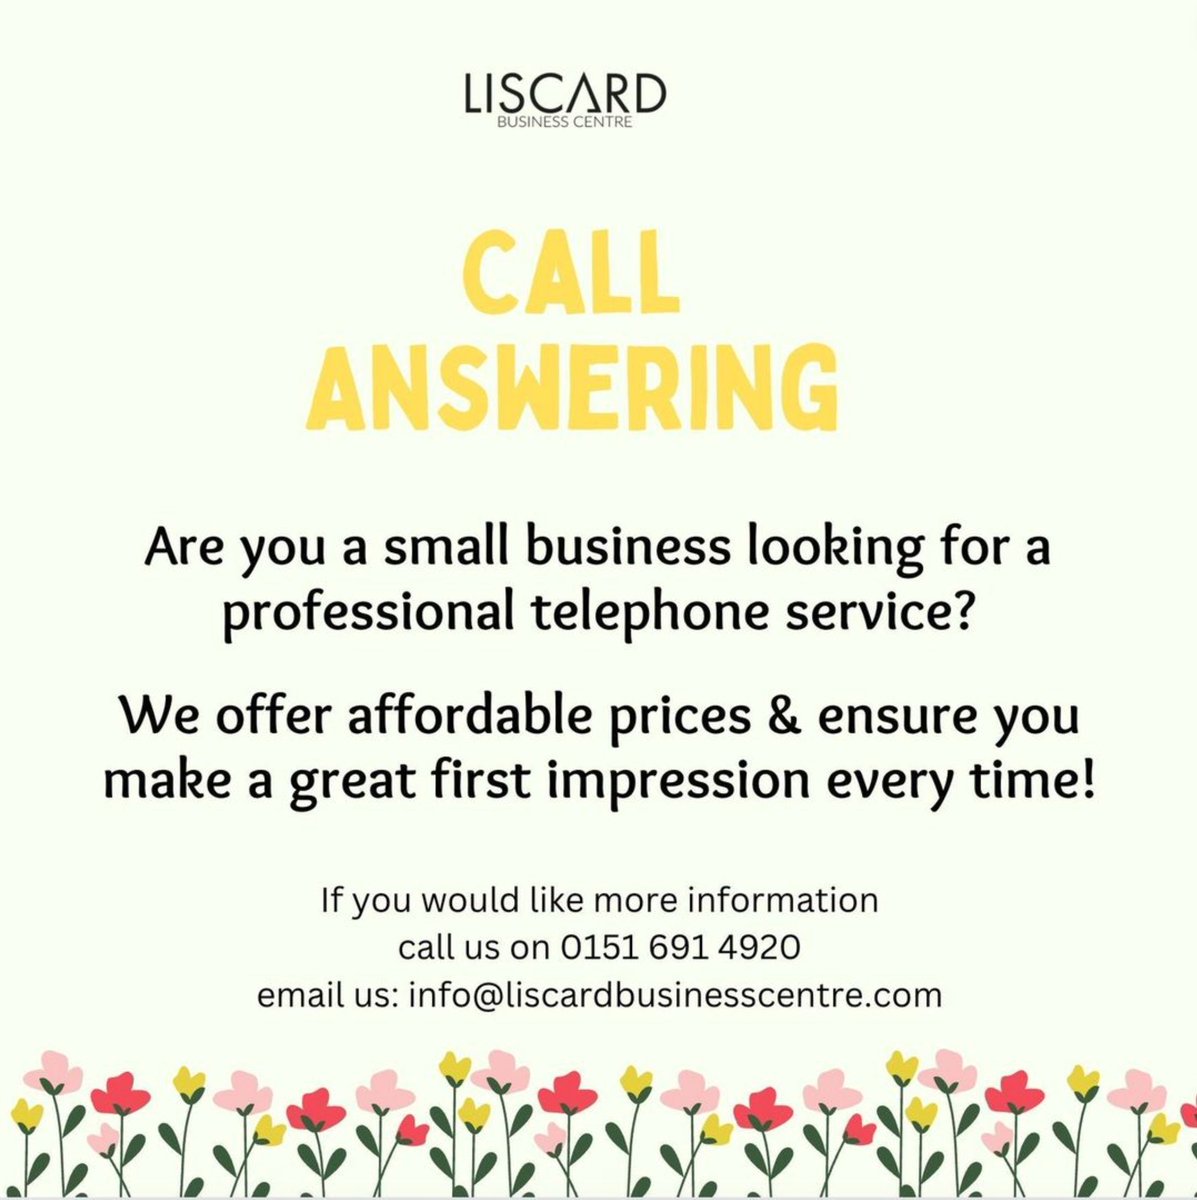 Would you like more information on our Call Answering Service?

Call us on 0151 691 4920

#callanswering #liscard #wirral #b2b #smallbusinessuk #westkirby #hoylake #virtualoffice #linkdin #servicedoffice #officespace #officetorent #hotdesking #meetingroom #meetingrooms